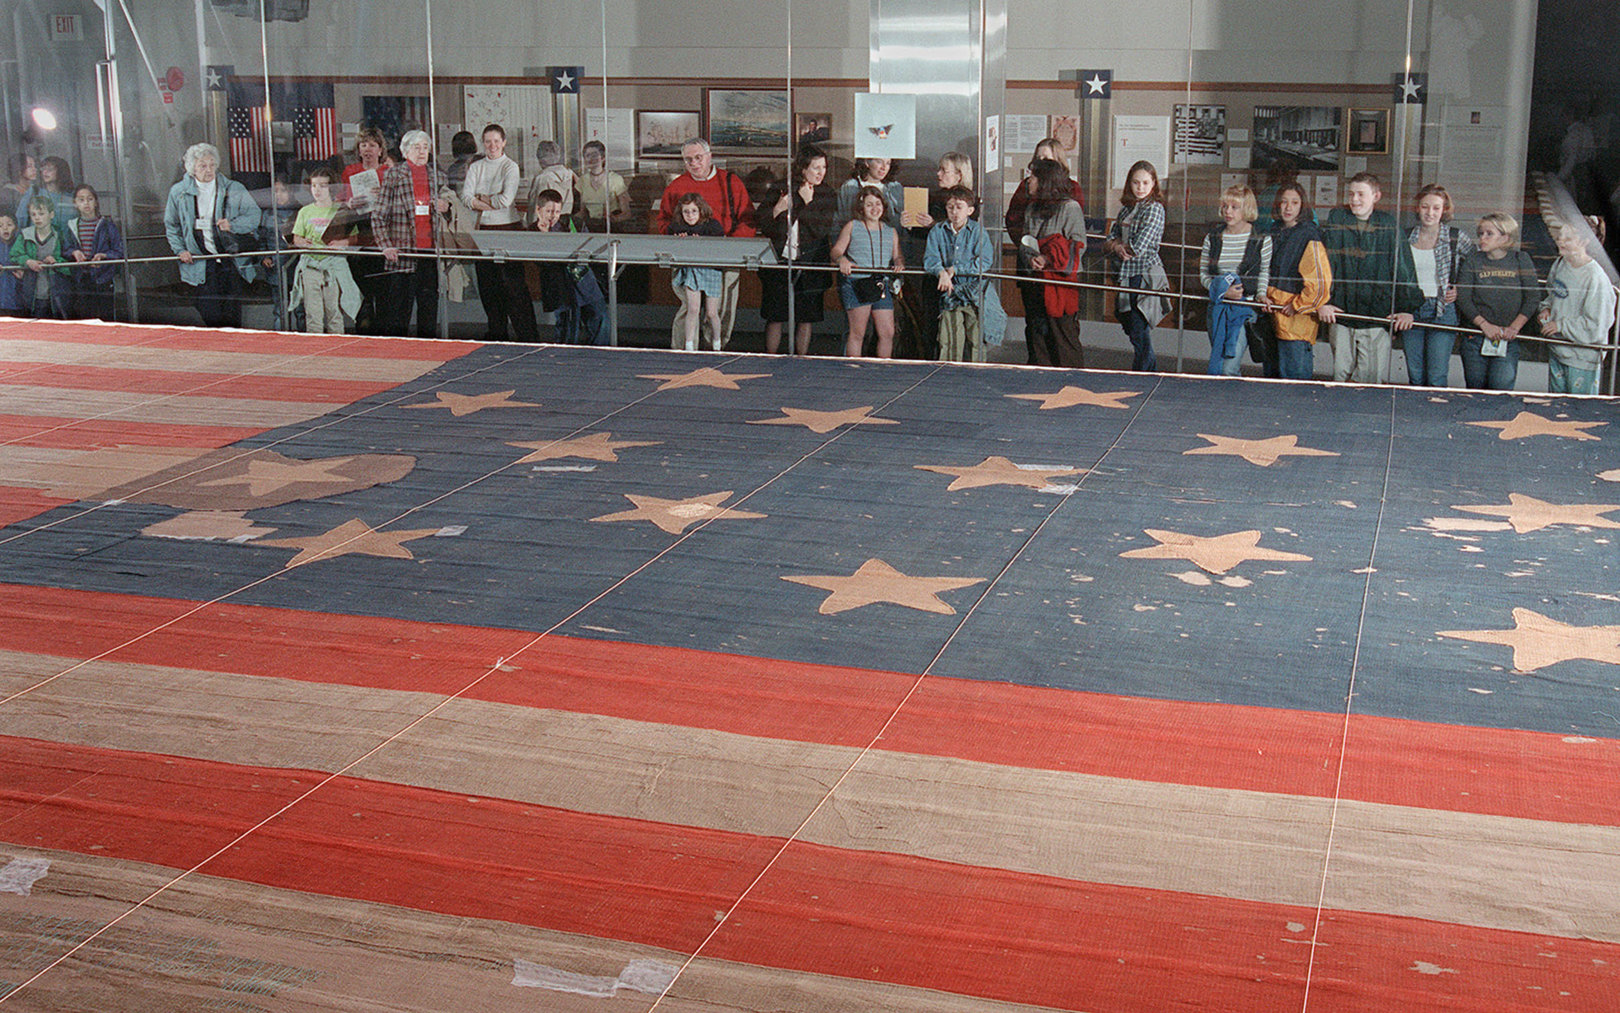 smithsonian-star-spangled-banner-conservation-lab-smithgroup